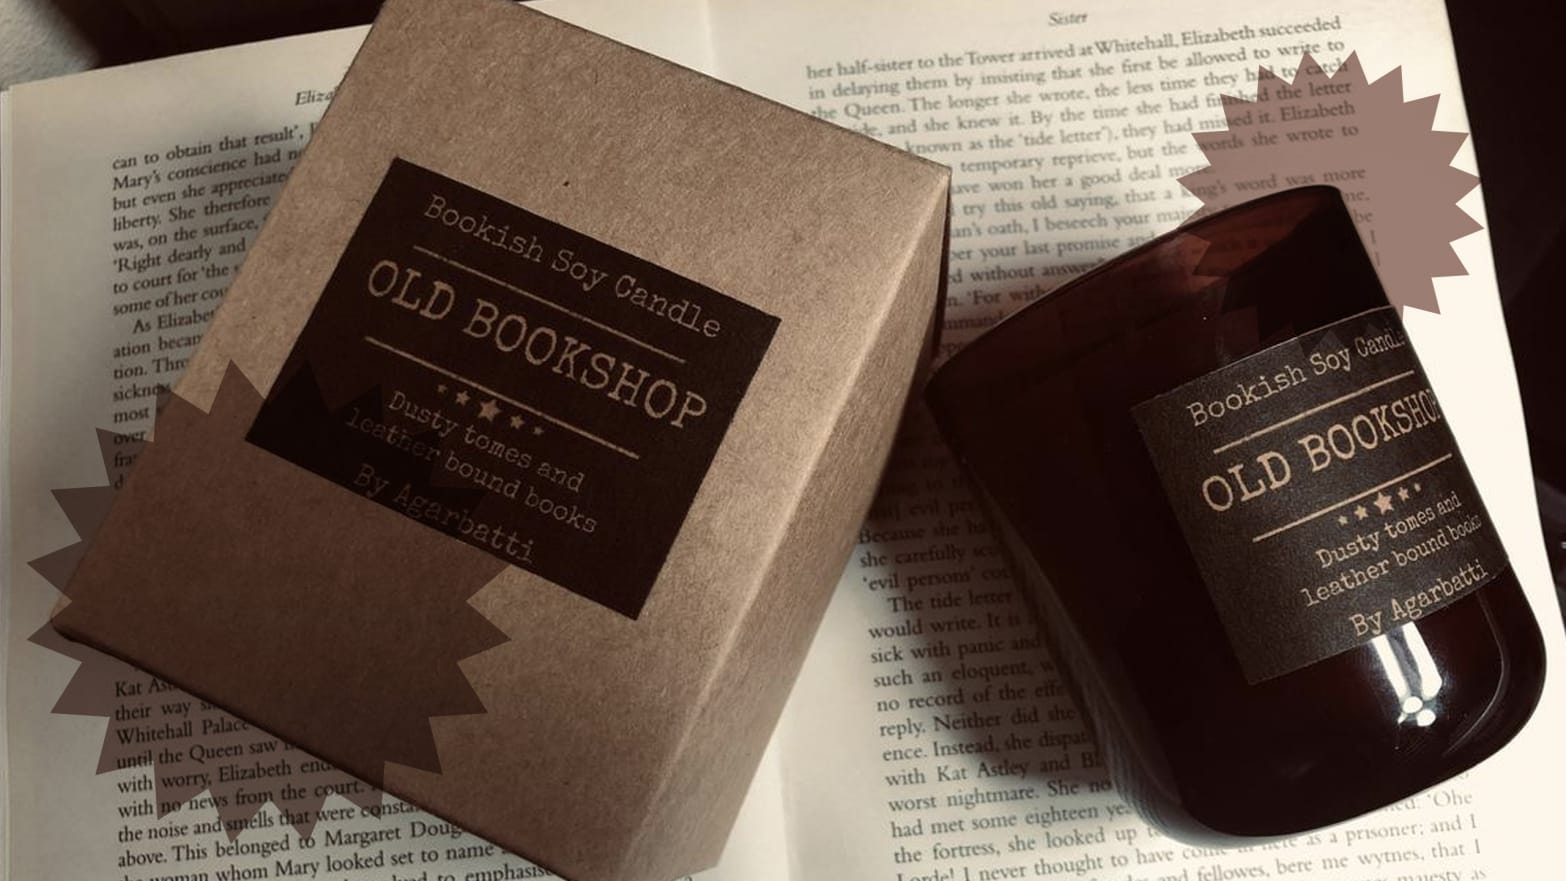 Old Books Candle, Old Books Scented Candle